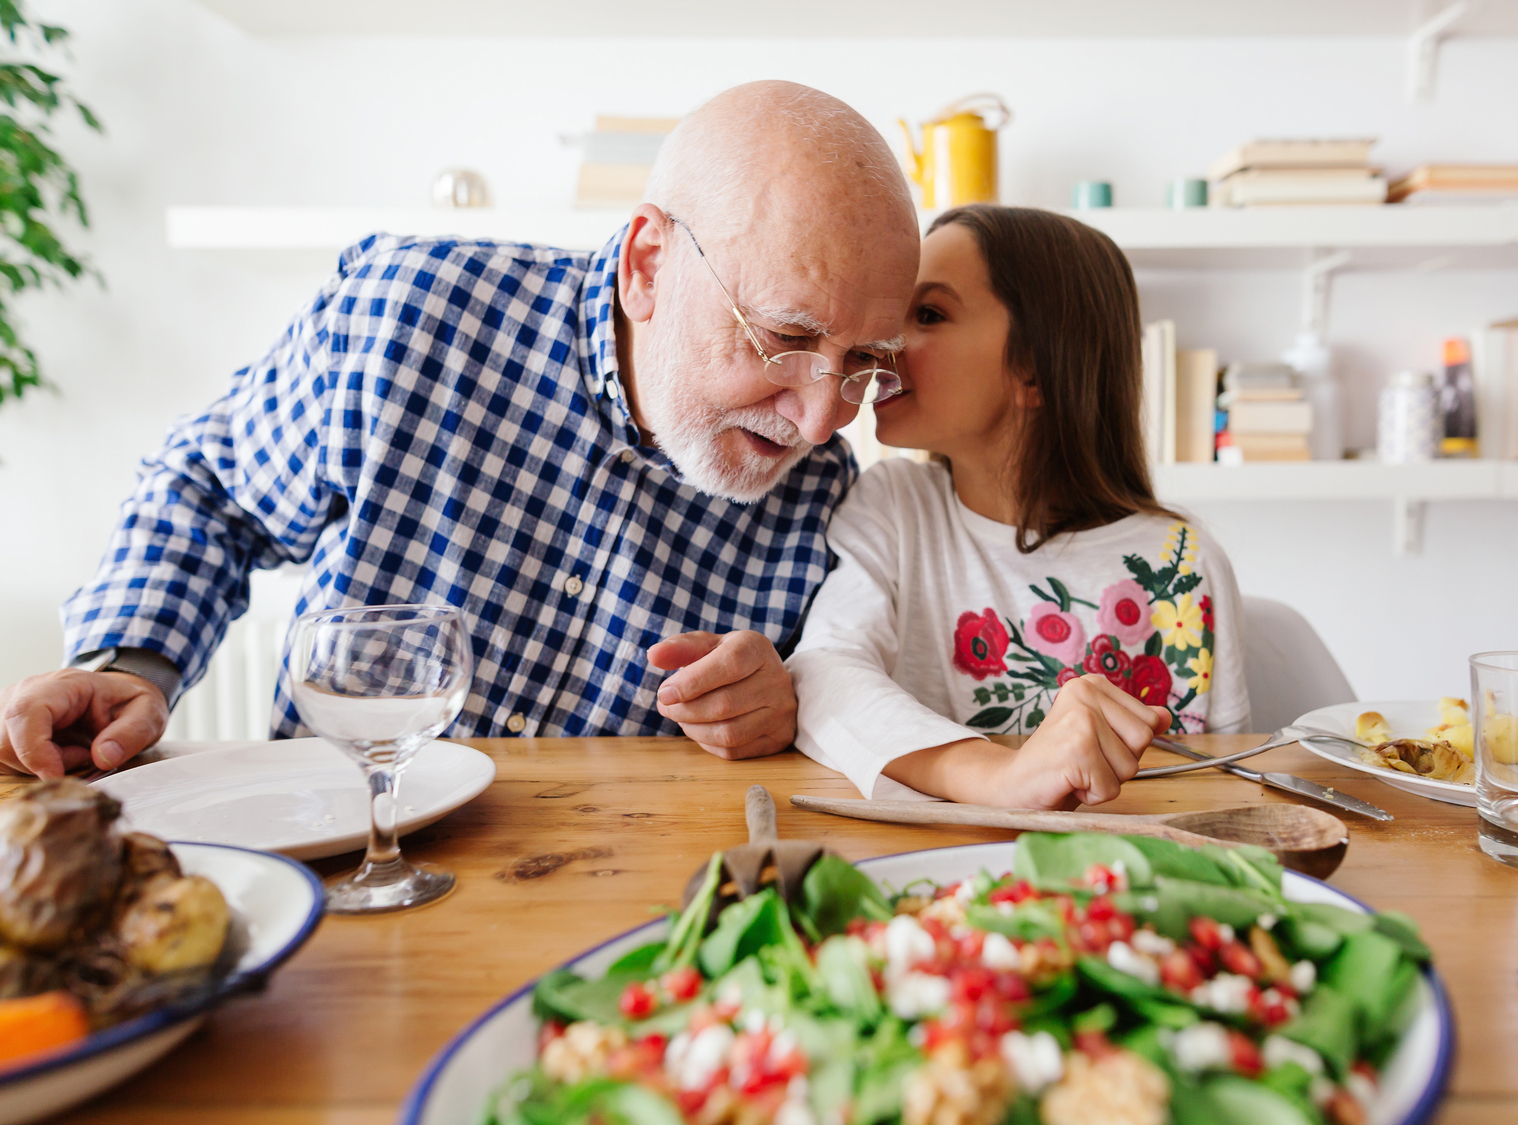 Healthy Soft Food Recipes and Ideas for the Elderly